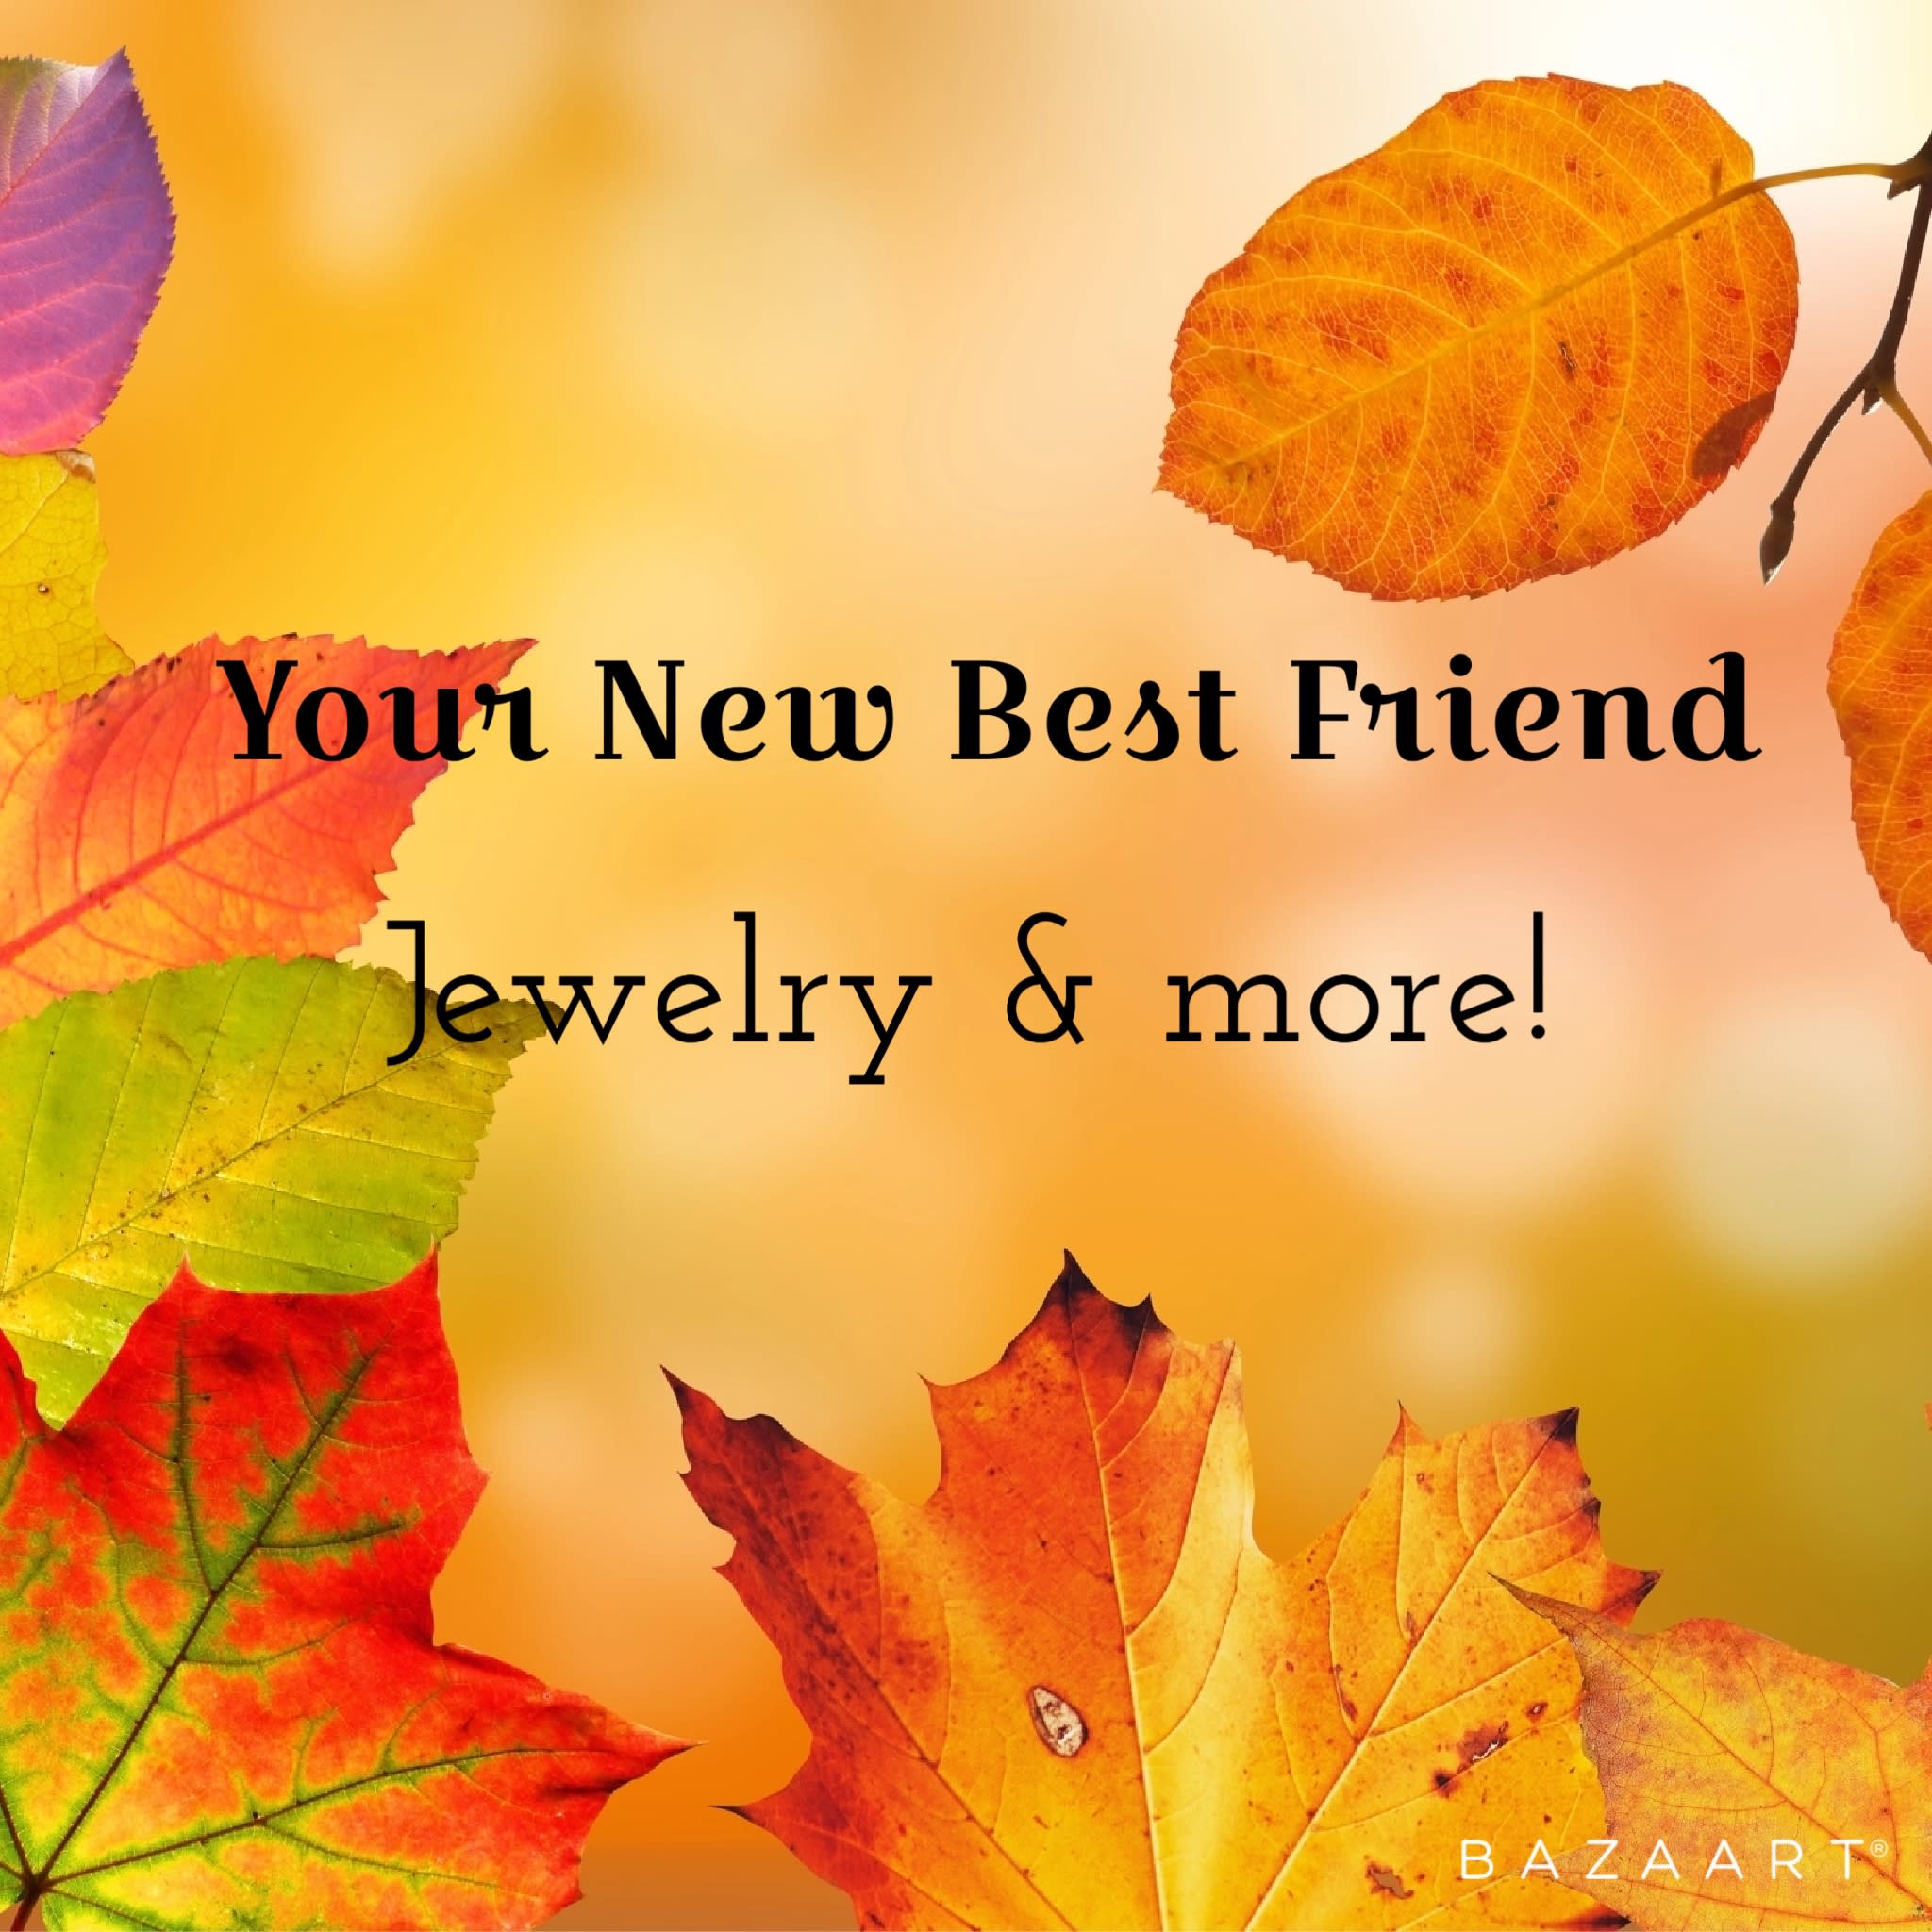 Your New Best Friend (Jewelry & More!)